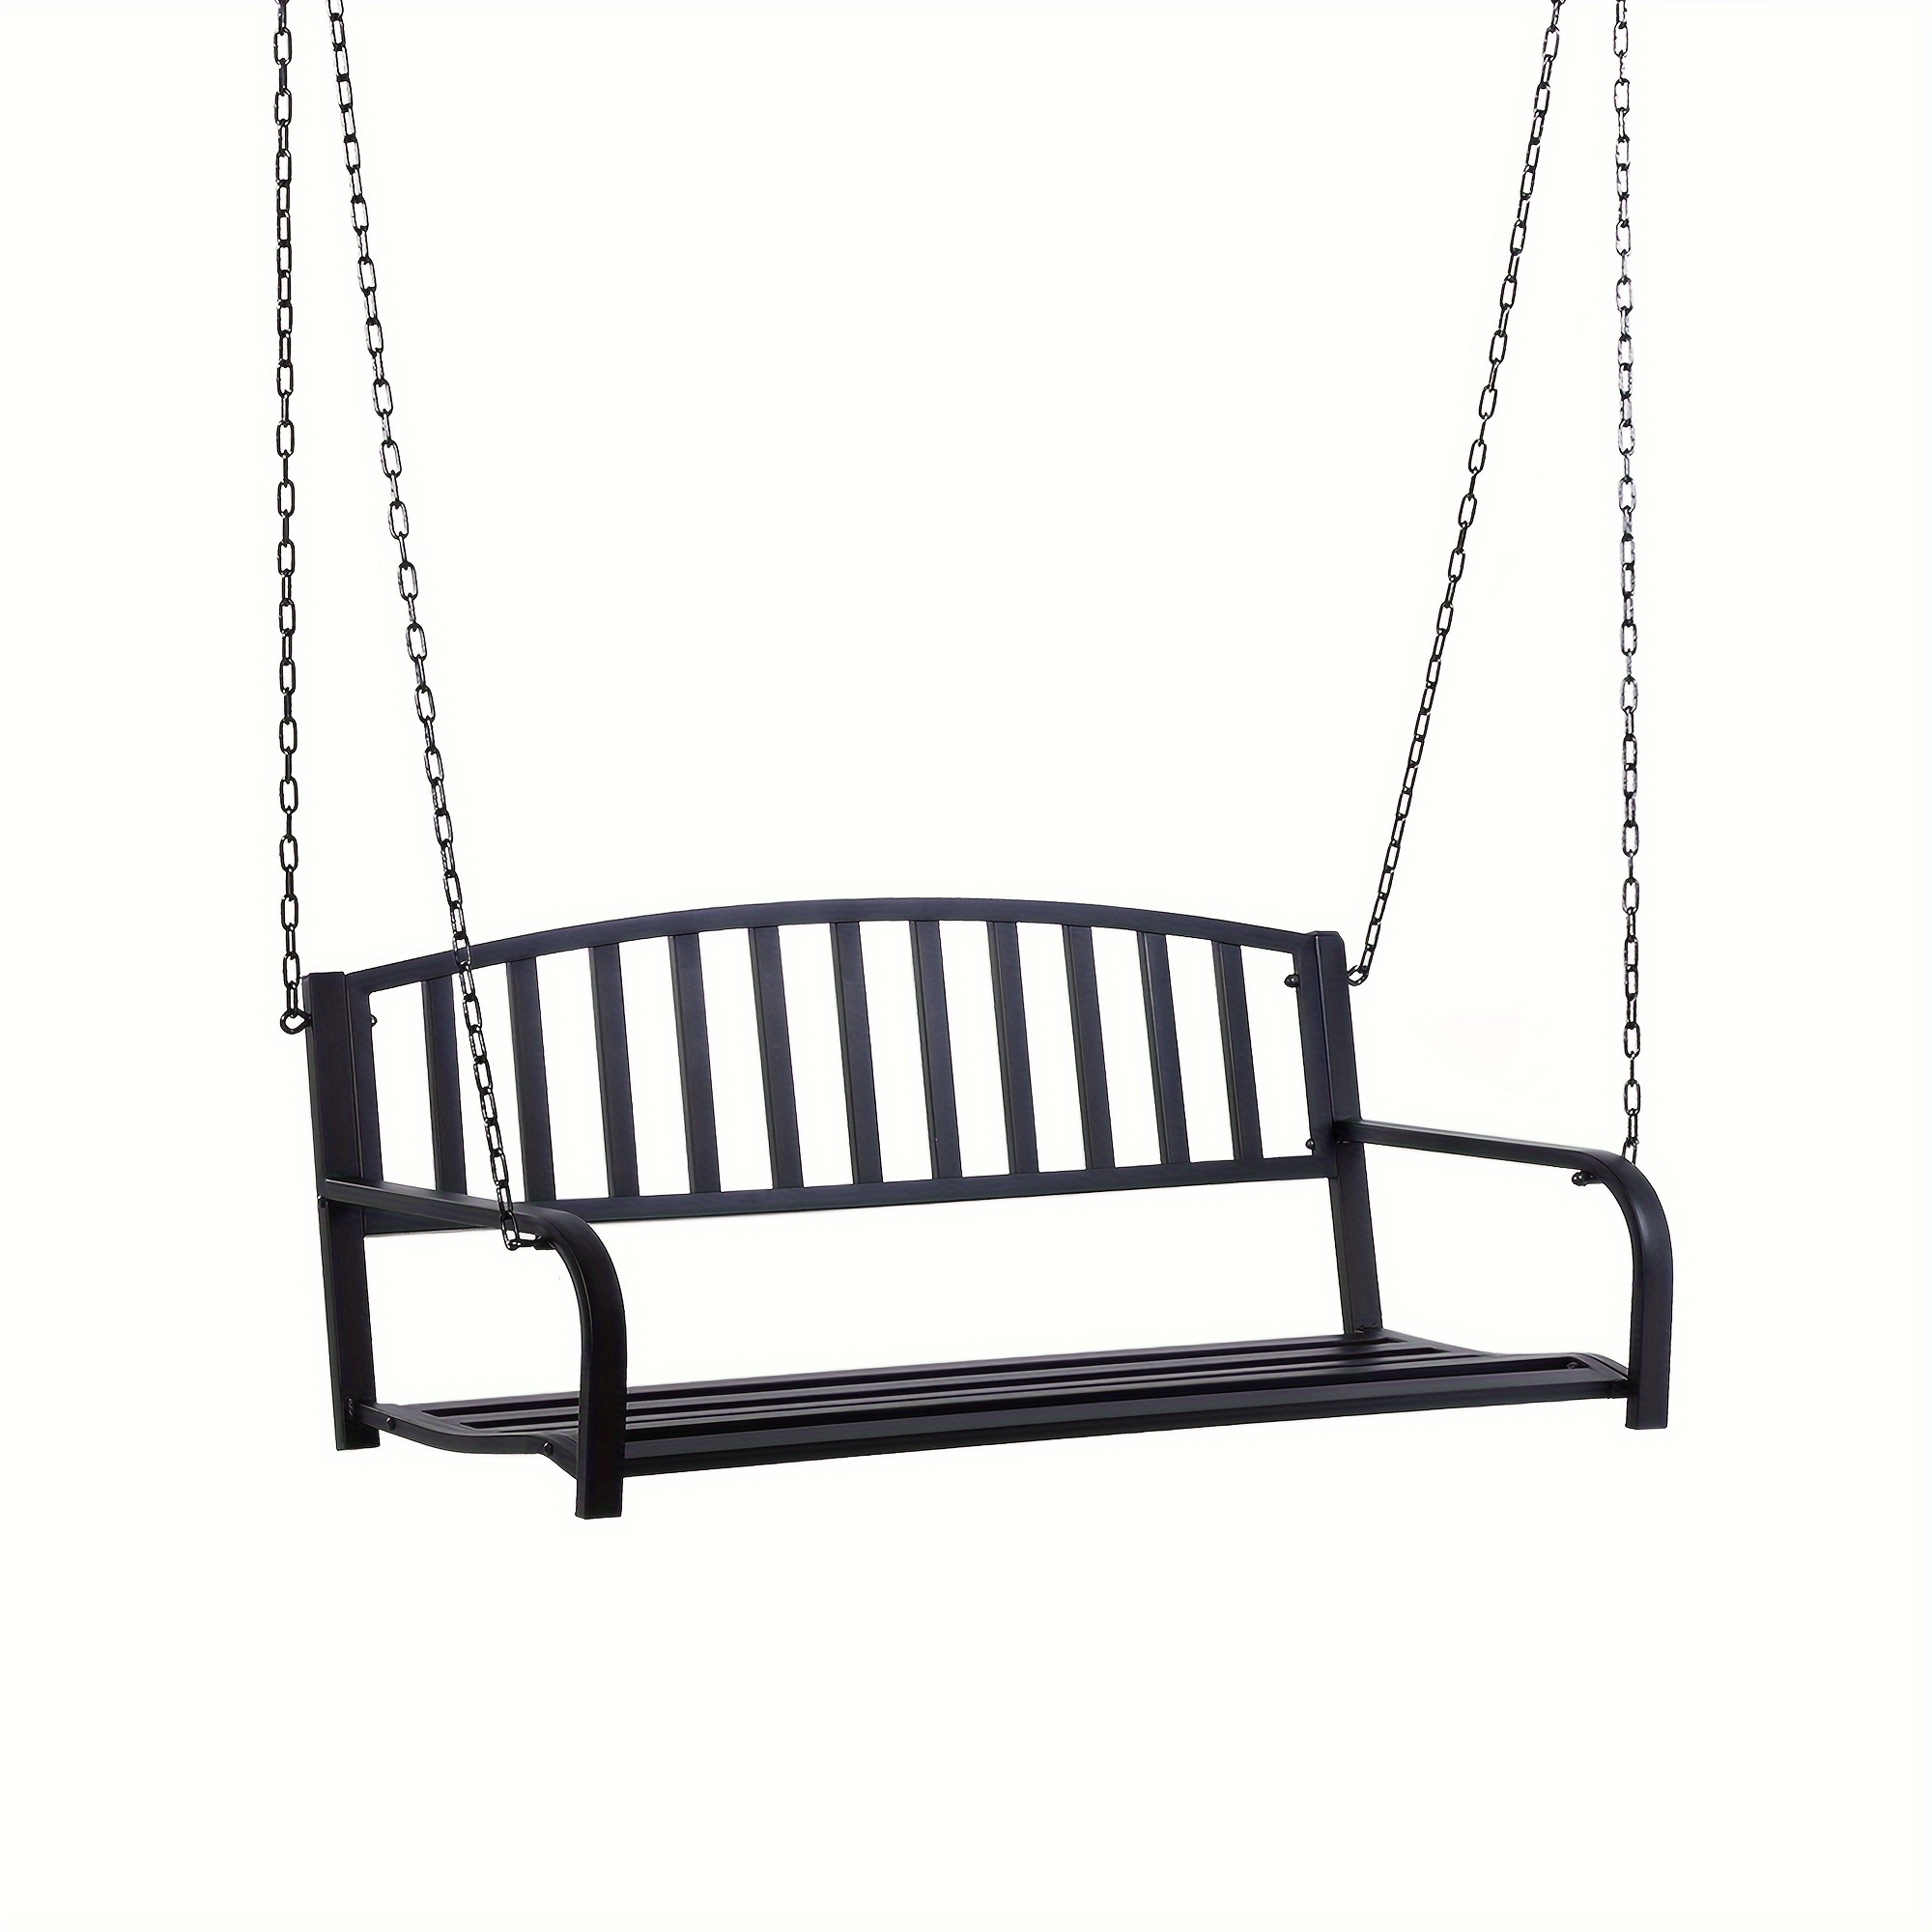 

2 Person Front Porch Swing Patio Swing Bench, Outdoor Steel Swing Chair With Sturdy Chains, For Backyard, Deck, 528 Lb Weight Capacity, Black